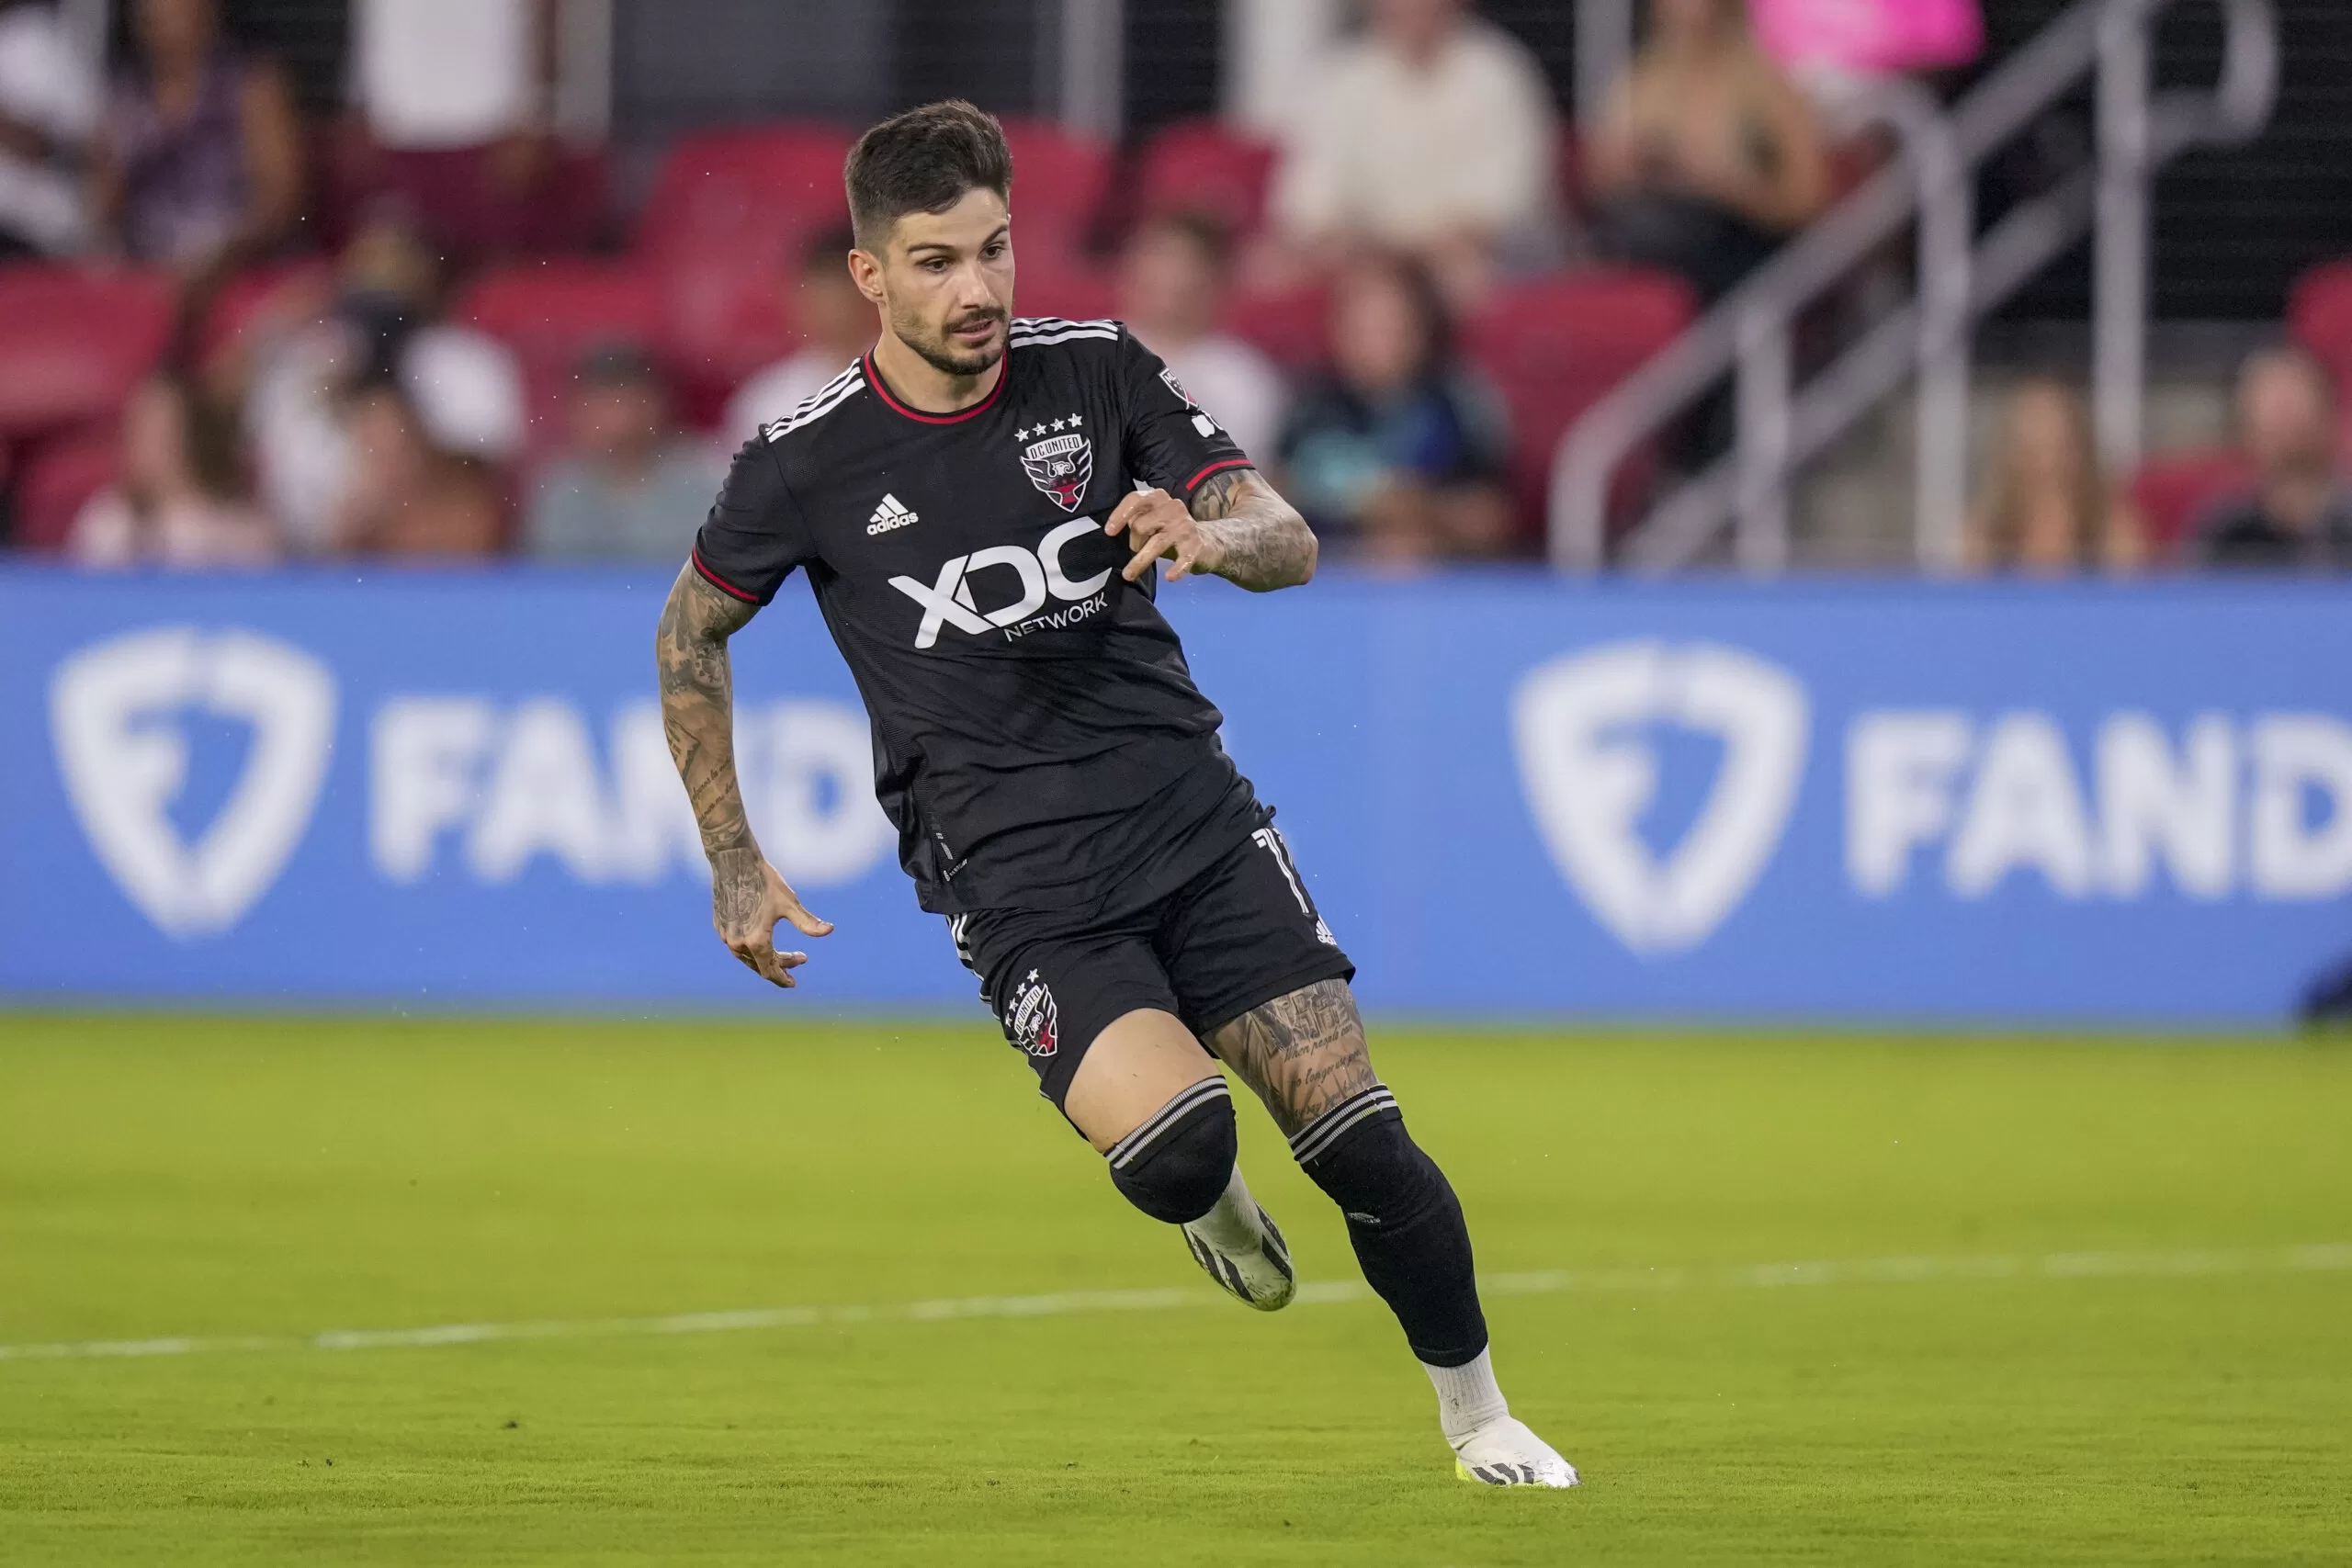 DC United parts ways with midfielder Taxi Fountas after allegations of slur use found credible
